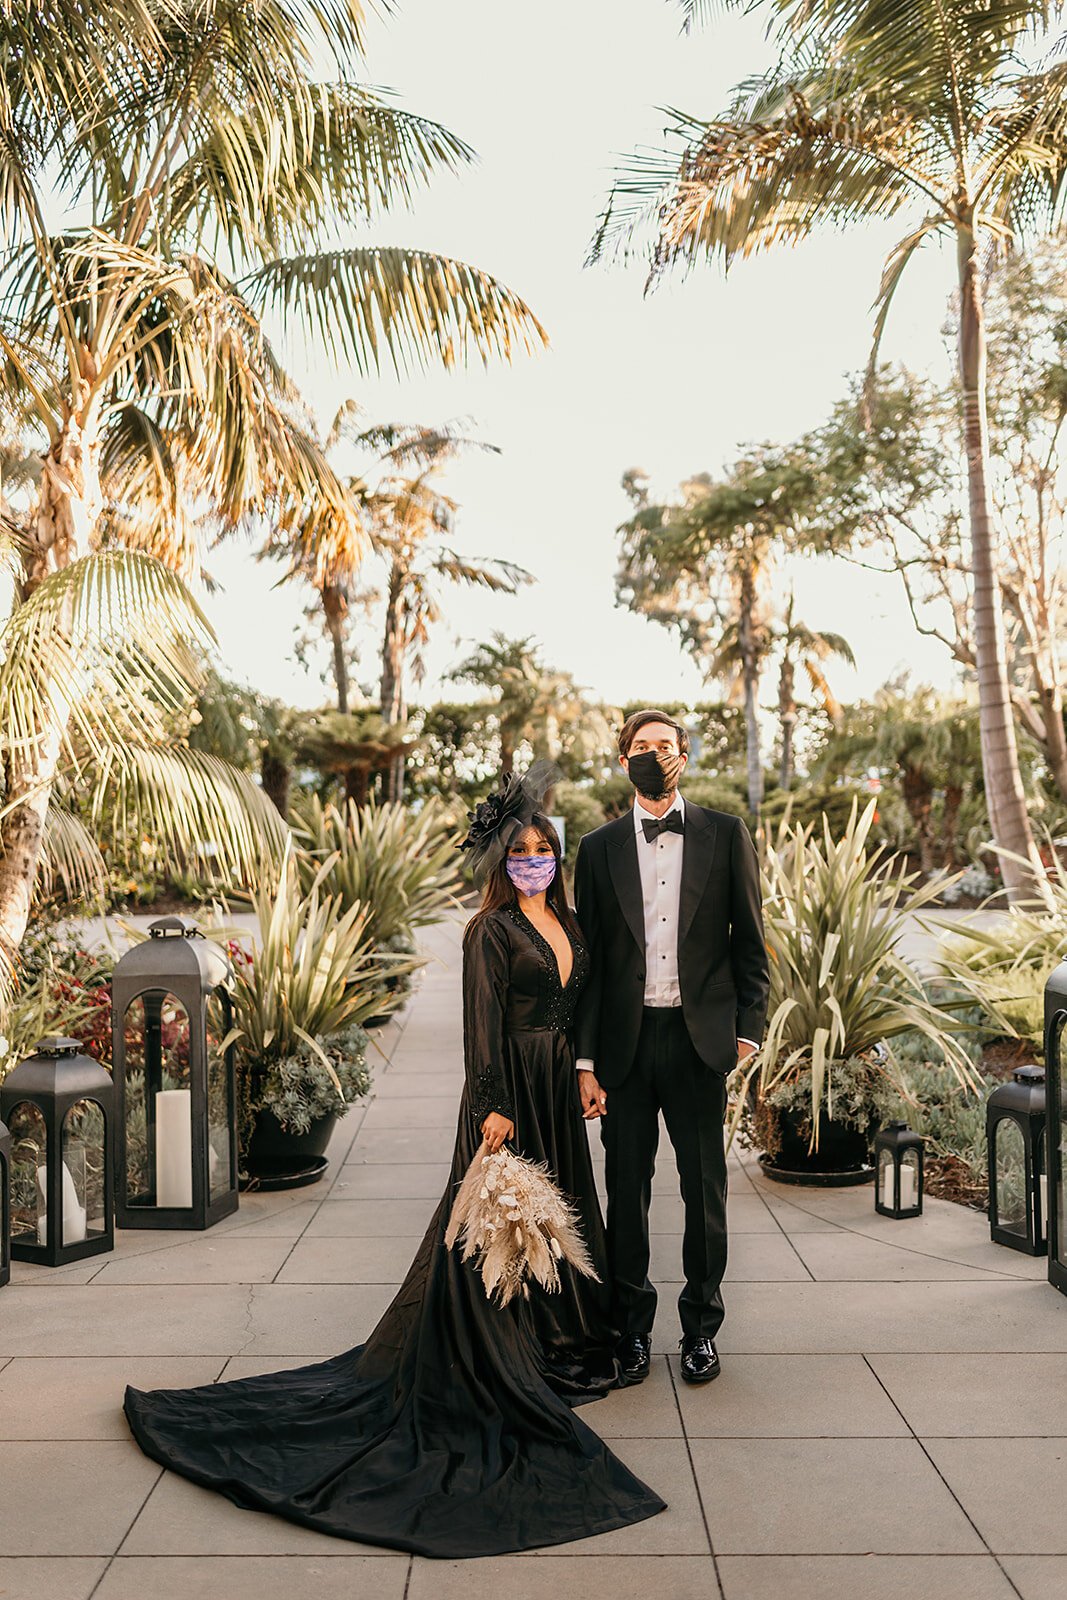 www.santabarbarawedding.com | Sarah Vendramini | The Ritz-Carlton Bacara | Lobo Floral | Mark Patterson | Bride and Groom with Their Masks On Among the Palm Trees